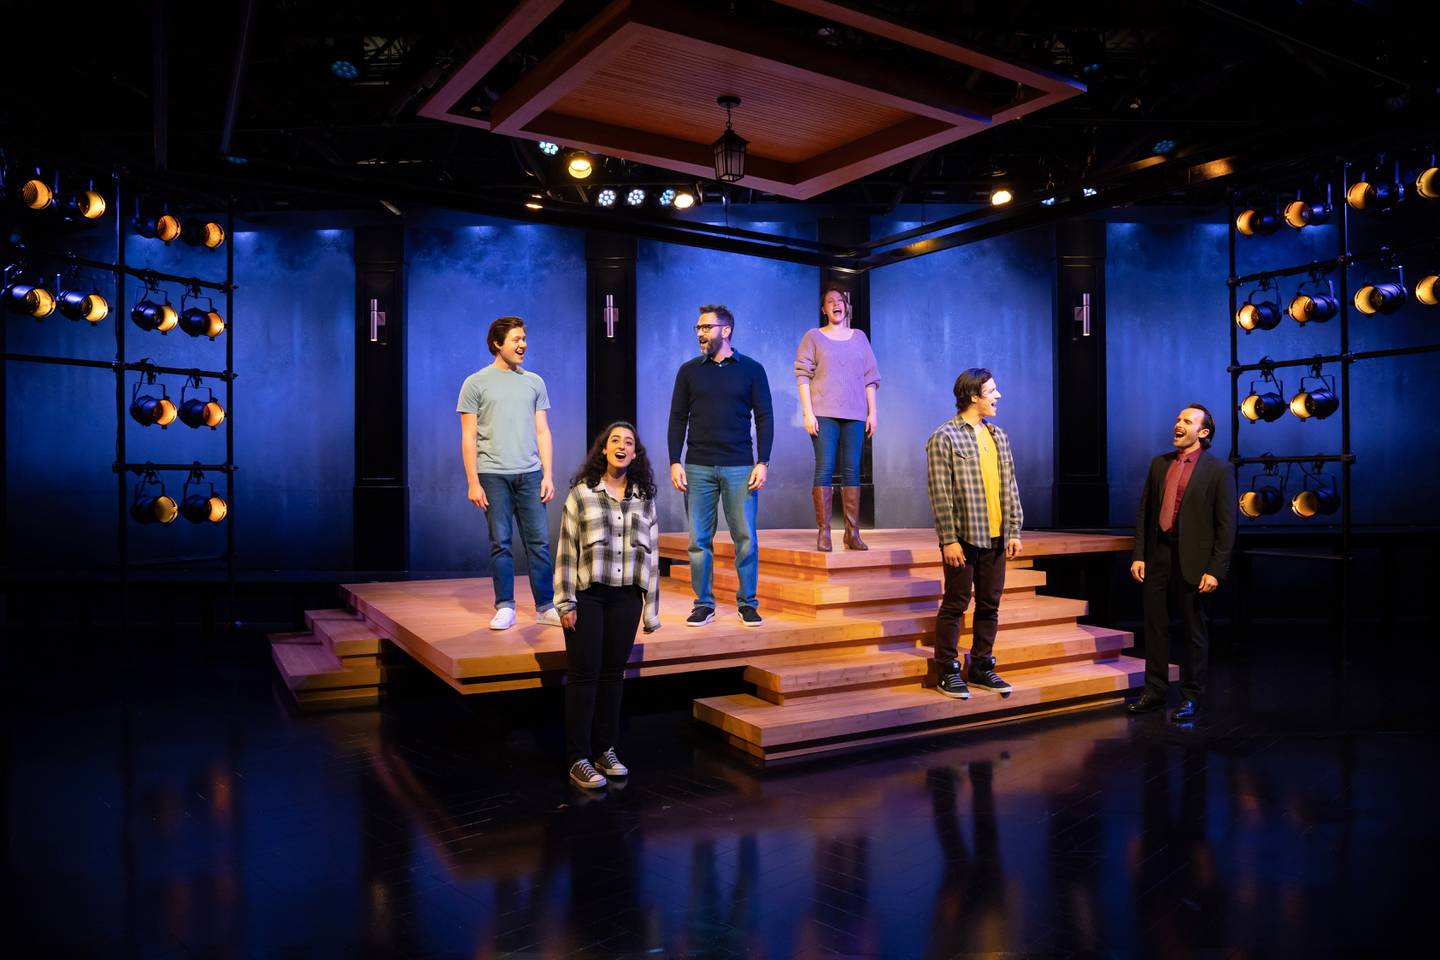 Paramount’s 2023-24 BOLD Series opener Next to Normal stars (front, from left) Angel Alzeidan as Natalie, Jake DiMaggio Lopez as Henry, Devin DeSantis as Dr. Fine/Dr. Madden, (back, from left) Jake Ziman as Gabe, Barry DeBois as Dan, and Donna Louden as Diana. Jim Corti directs. Performances are July 26-September 3, 2023 at Paramount’s Copley Theatre, 8 E. Galena Blvd. in downtown Aurora. Tickets: paramountaurora.com or (630) 896-6666. Credit: Liz Lauren